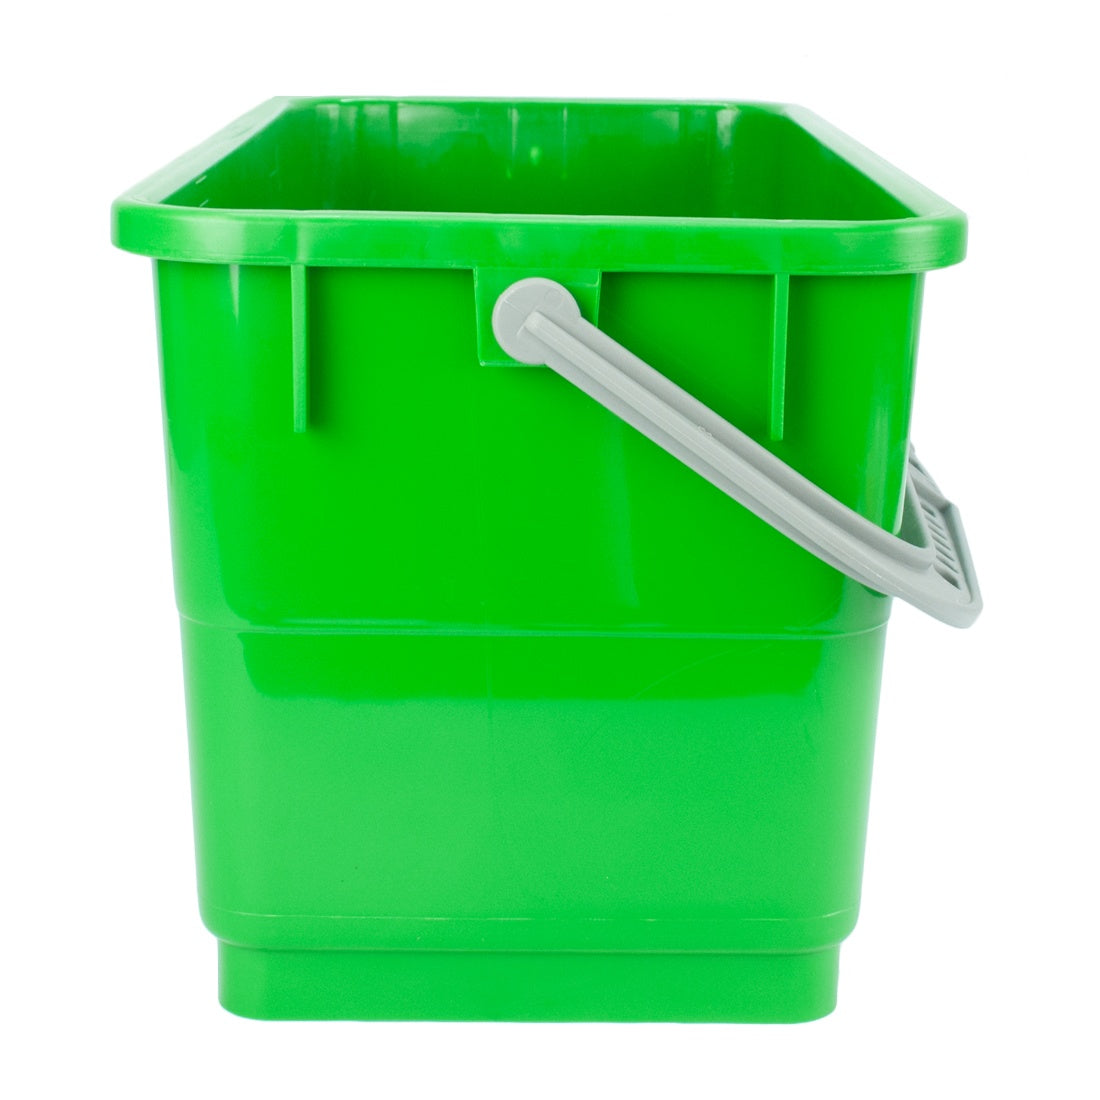 Green 6 Gallon Pulex Bucket with Grey Handle Side View